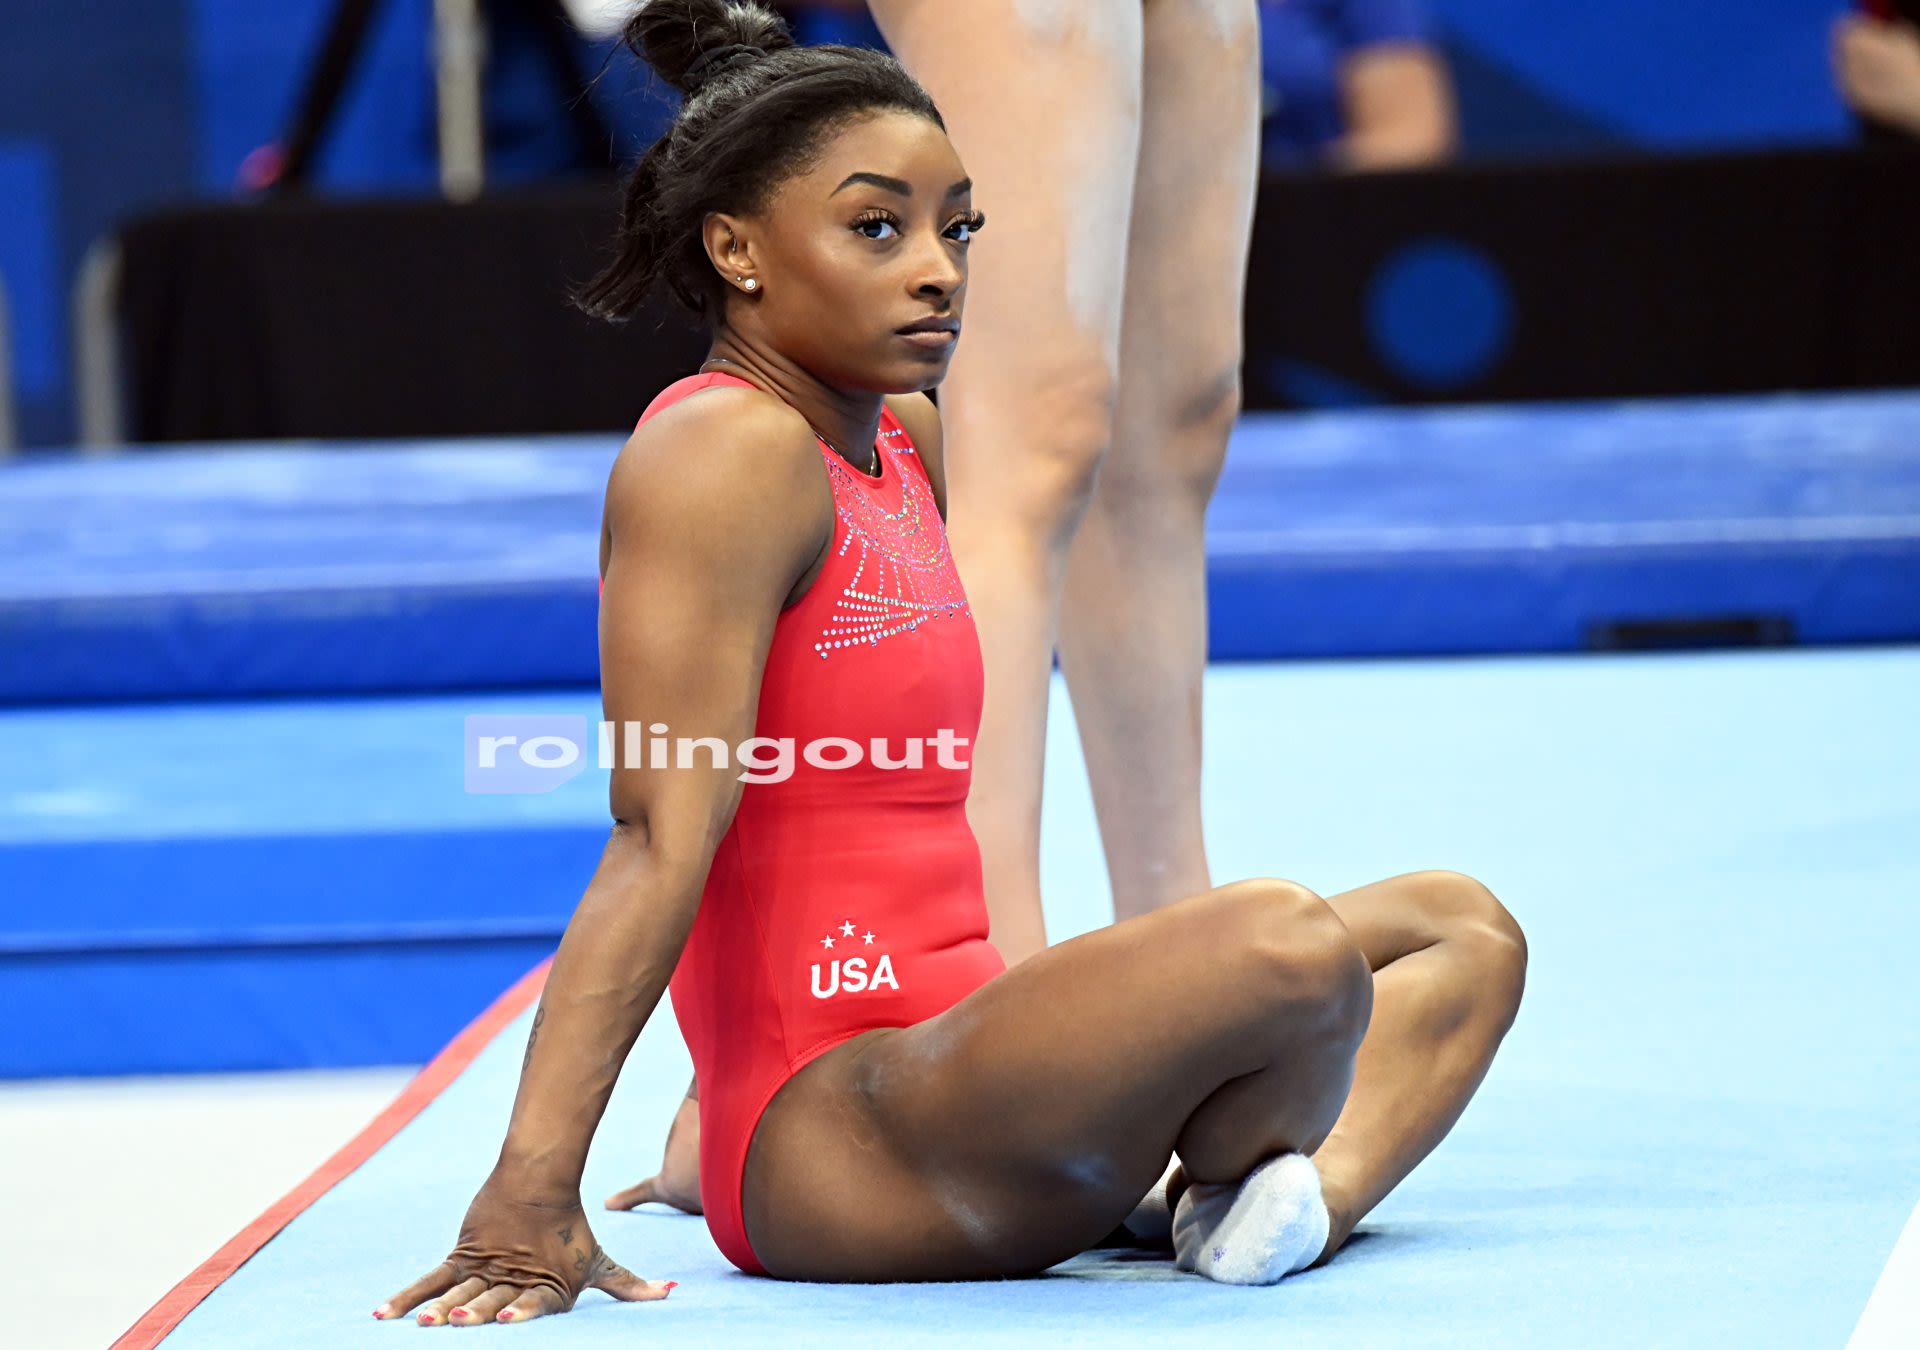 Simone Biles fumes about Olympic tradition she said needs to stop